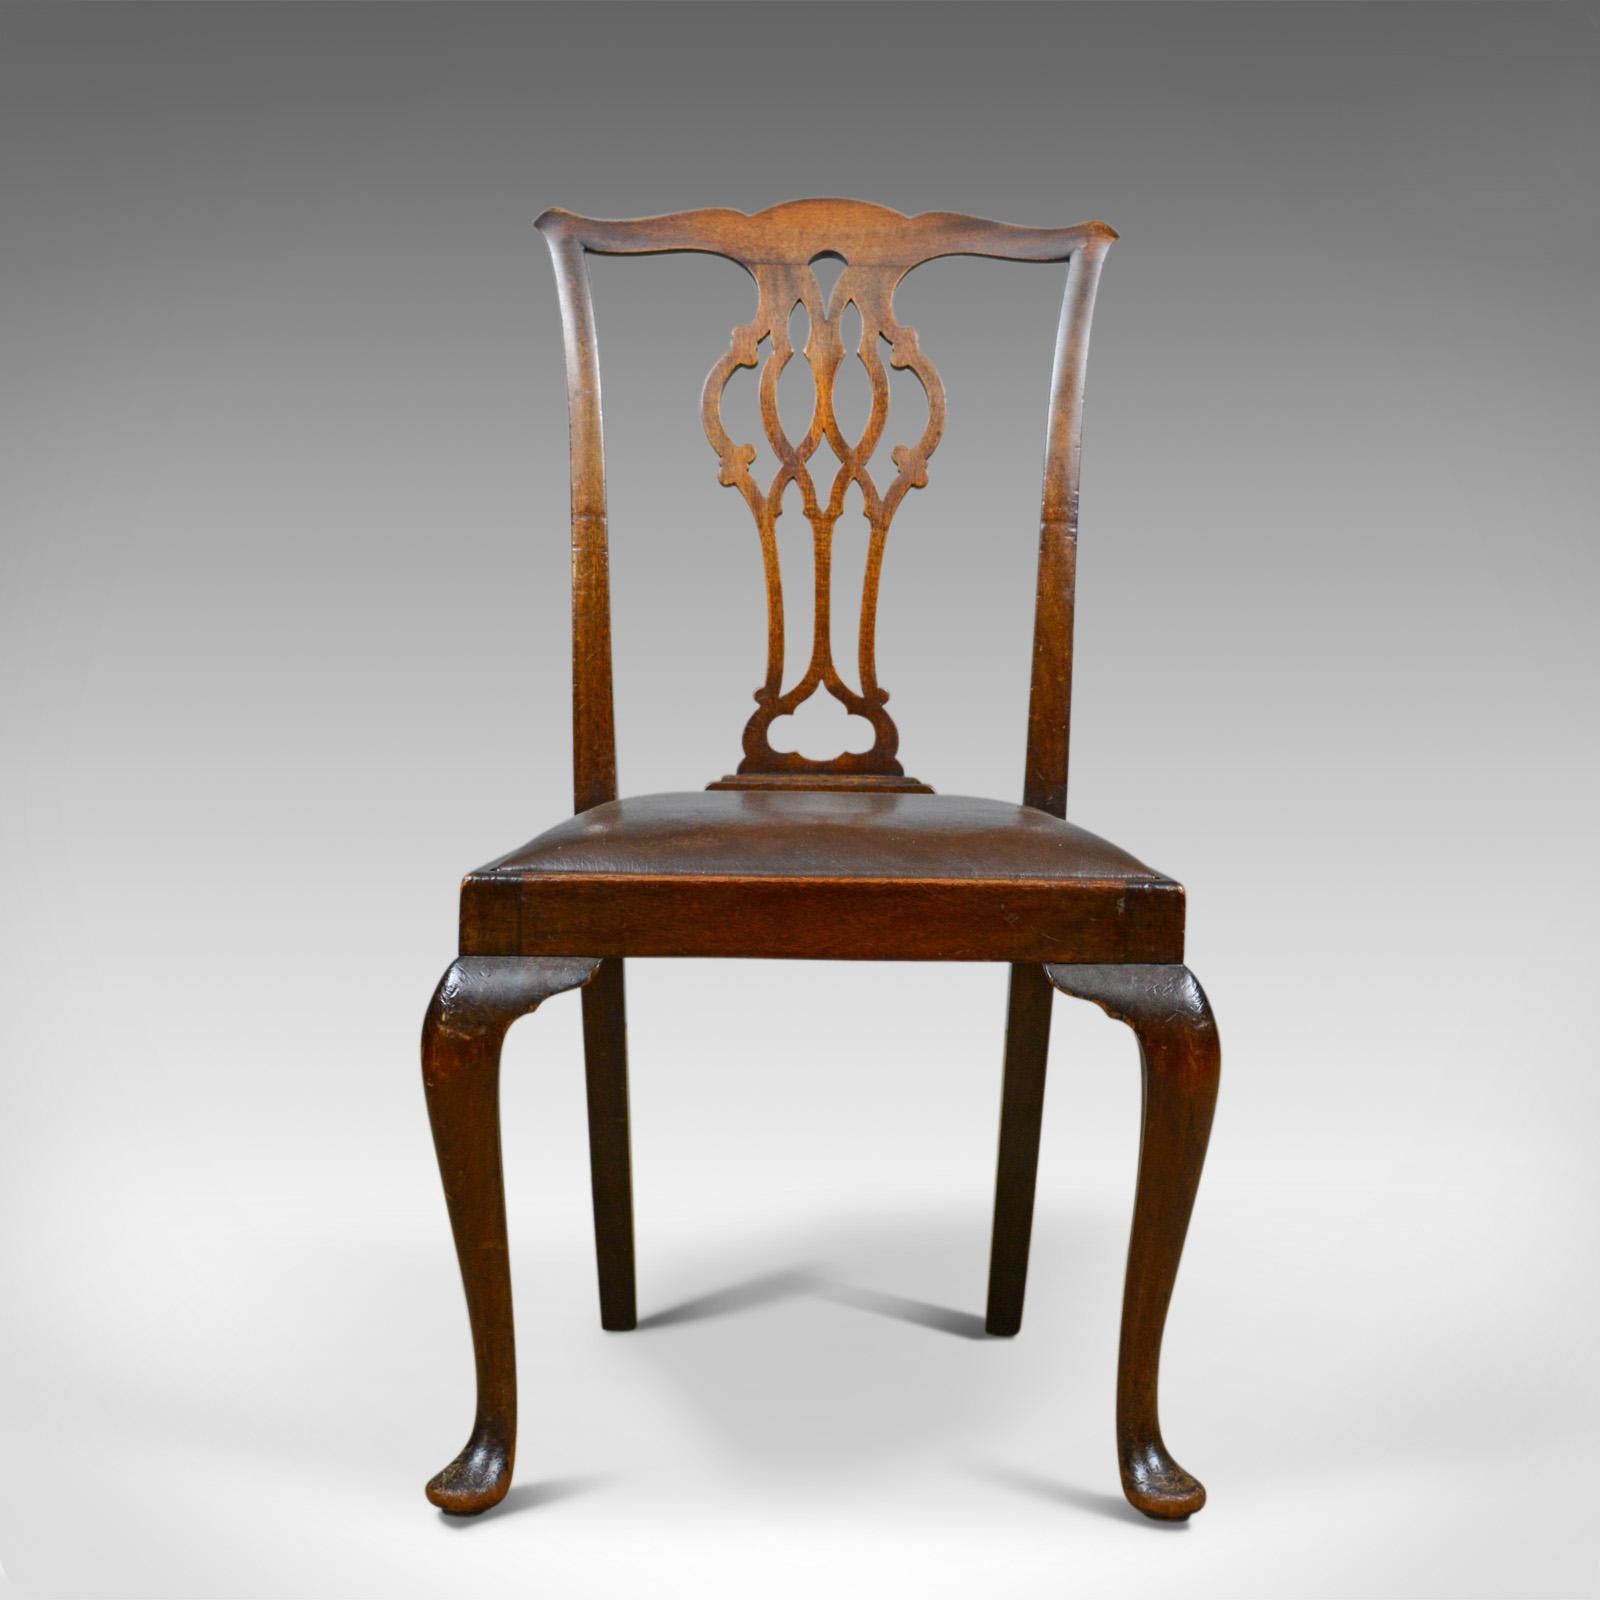 This is a set of six antique dining chairs. English, Victorian, Chippendale revival in mahogany and leather and dating to the turn of the 20th century, circa 1900.

An attractive set of six, English, Chippendale revival dining chairs
In good